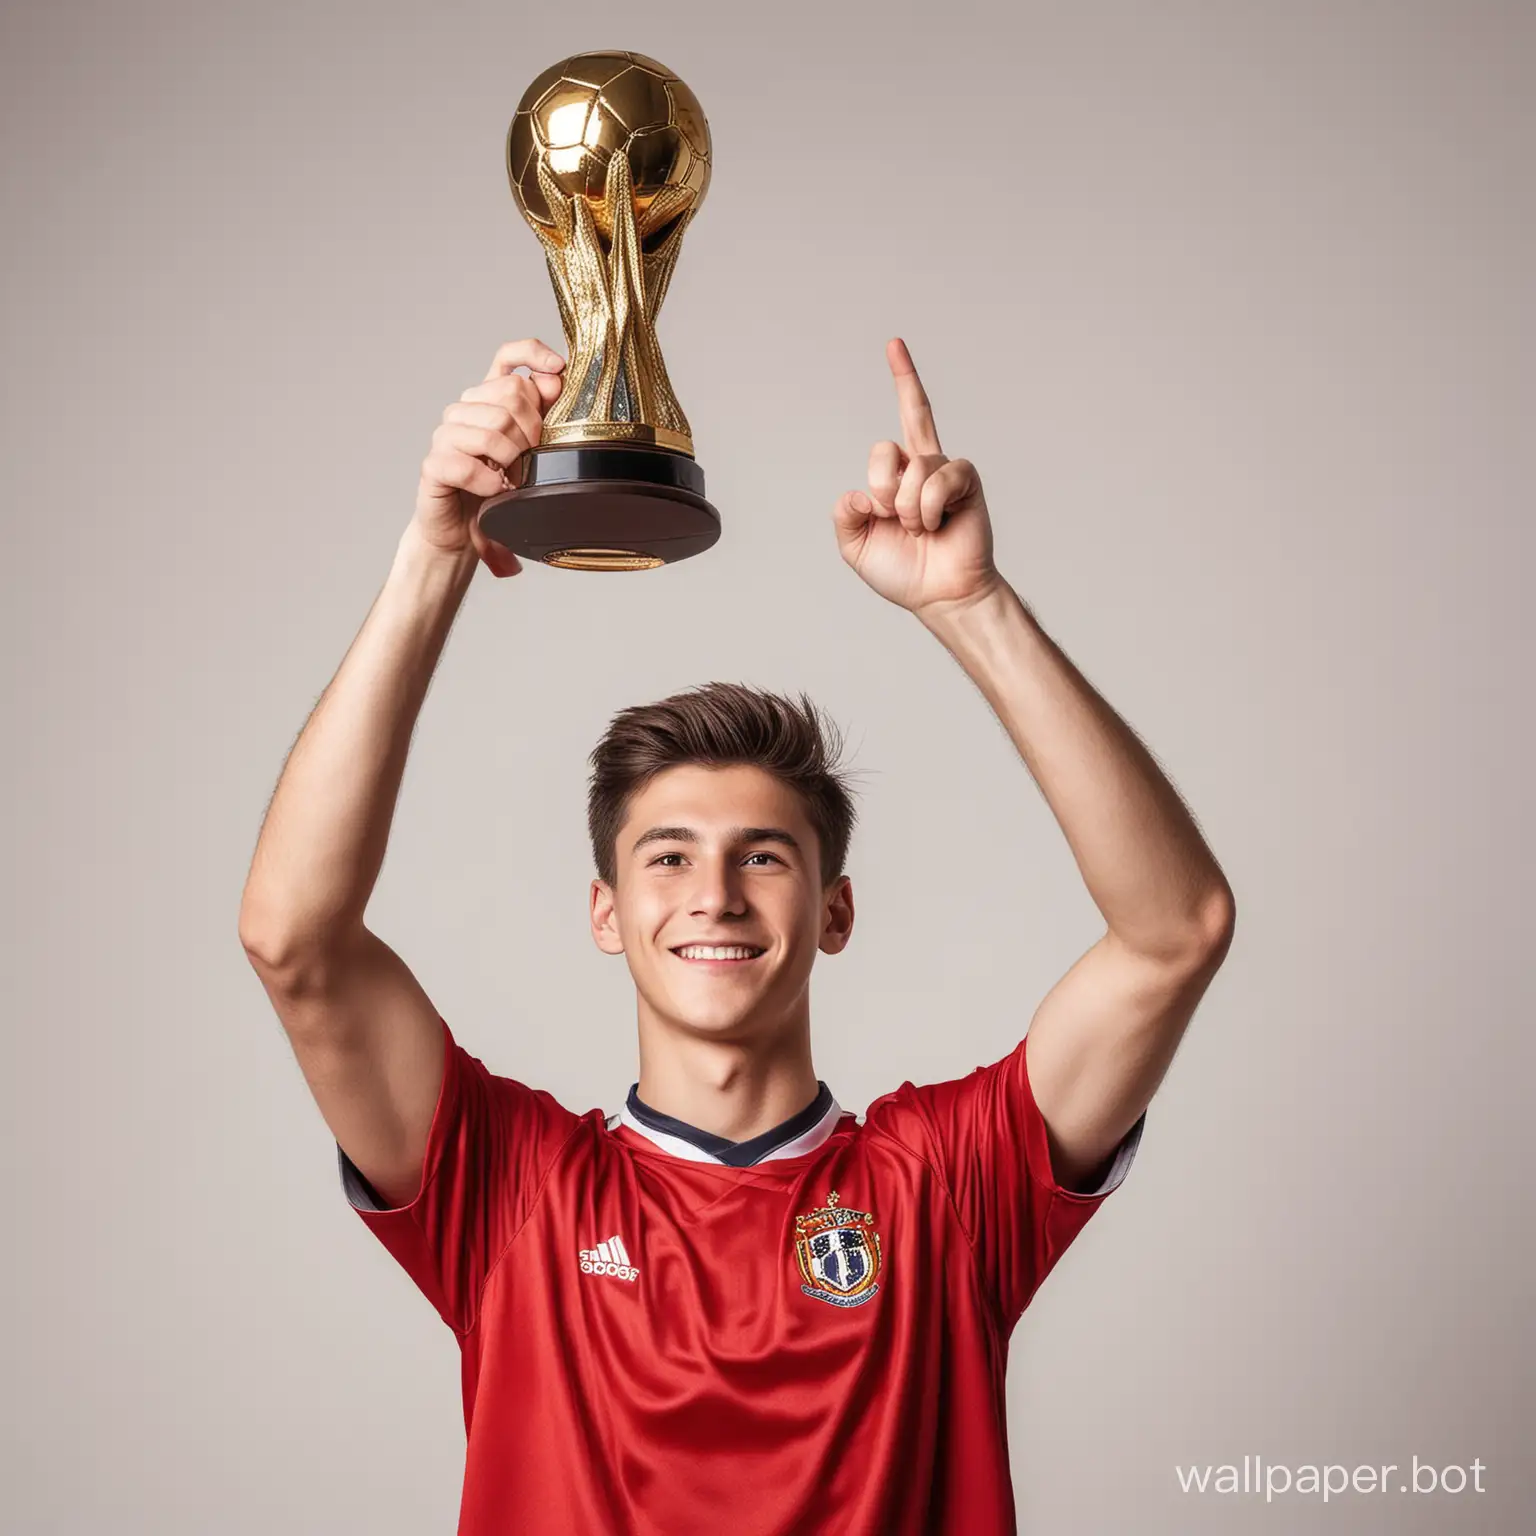 soccer guy 20 years old in a red uniform holds a trophy above his head white background photo 16K